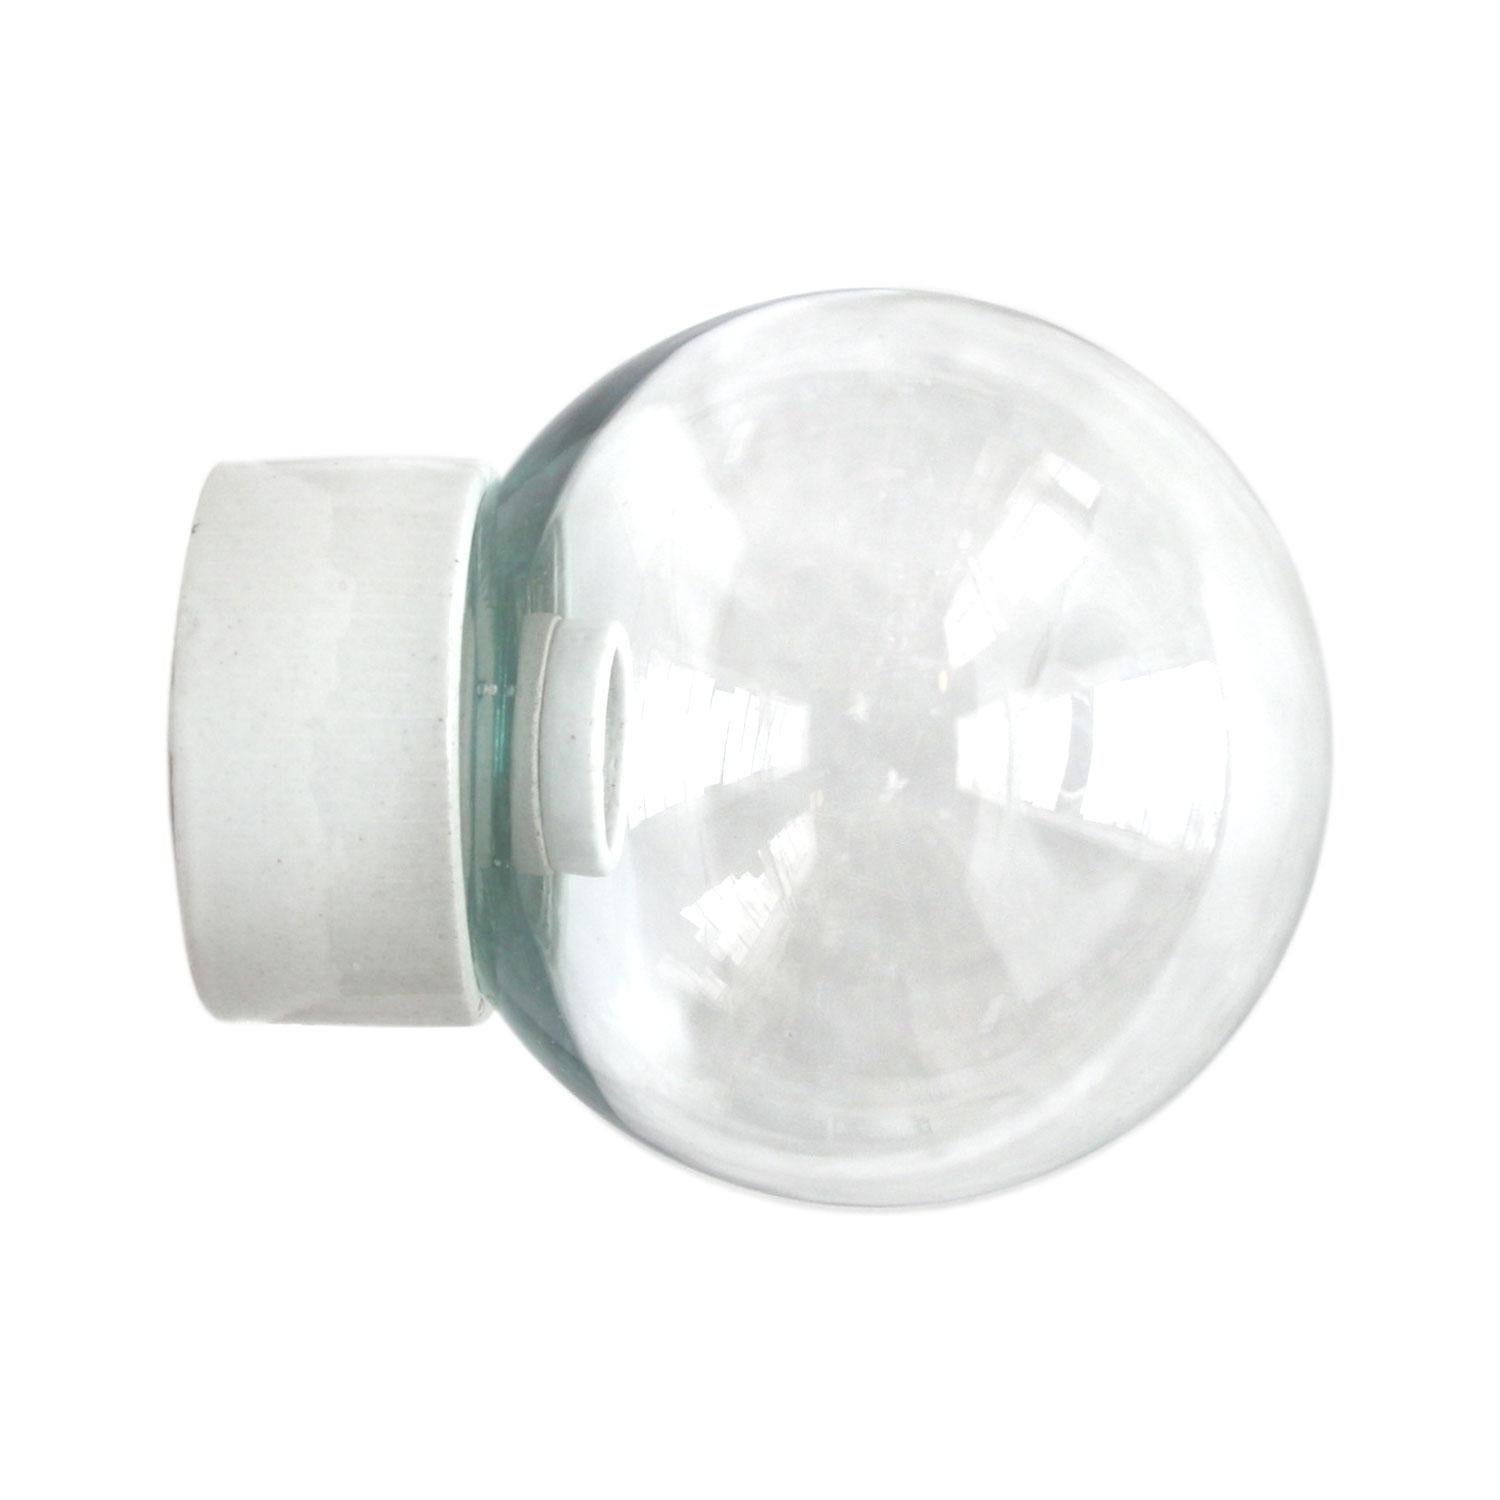 Industrial ceiling lamp.
White porcelain, clear glass.

2 conductors, no ground.
Measures: Diameter foot 10 cm
Suitable for 110 volt USA
new wiring is CE certified (220 volt) or UL Listed (110 volt) 

Weight: 1.1 kg / 2.4 lb

Priced per